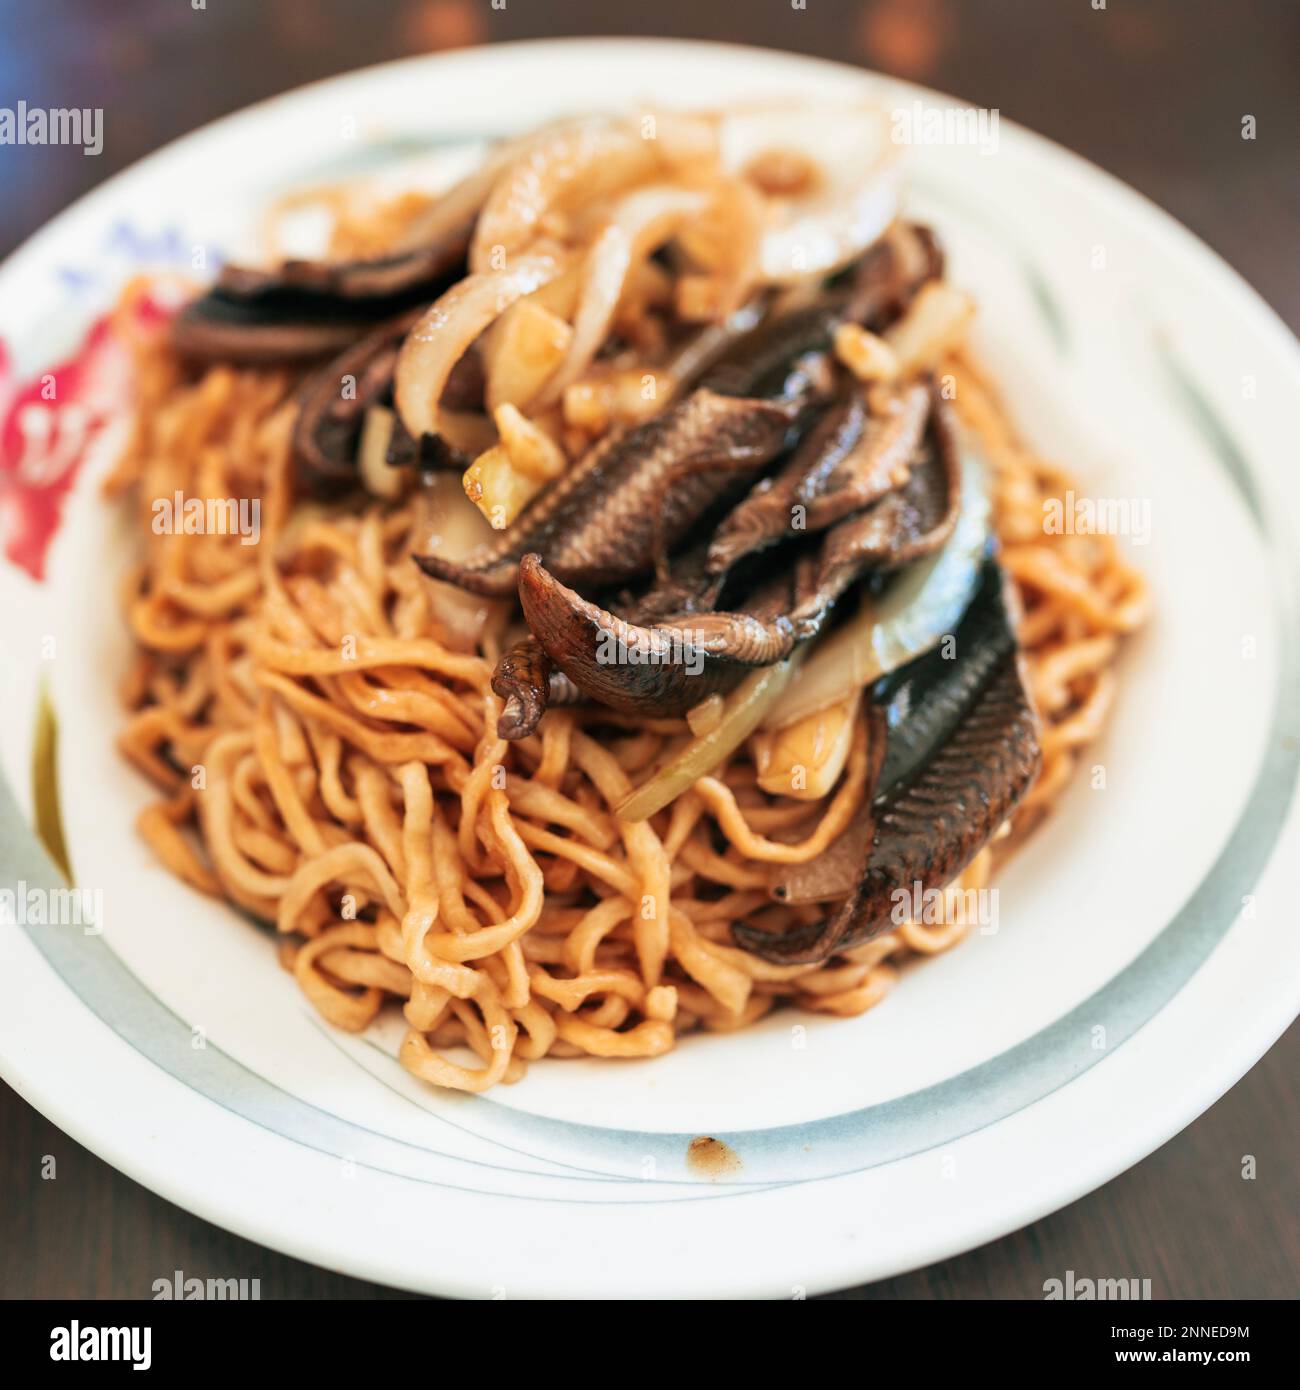 Taiwanese street food - Eel noodles. It's fried eel served over flat noodles in a thick sweet and sour sauce. Stock Photo